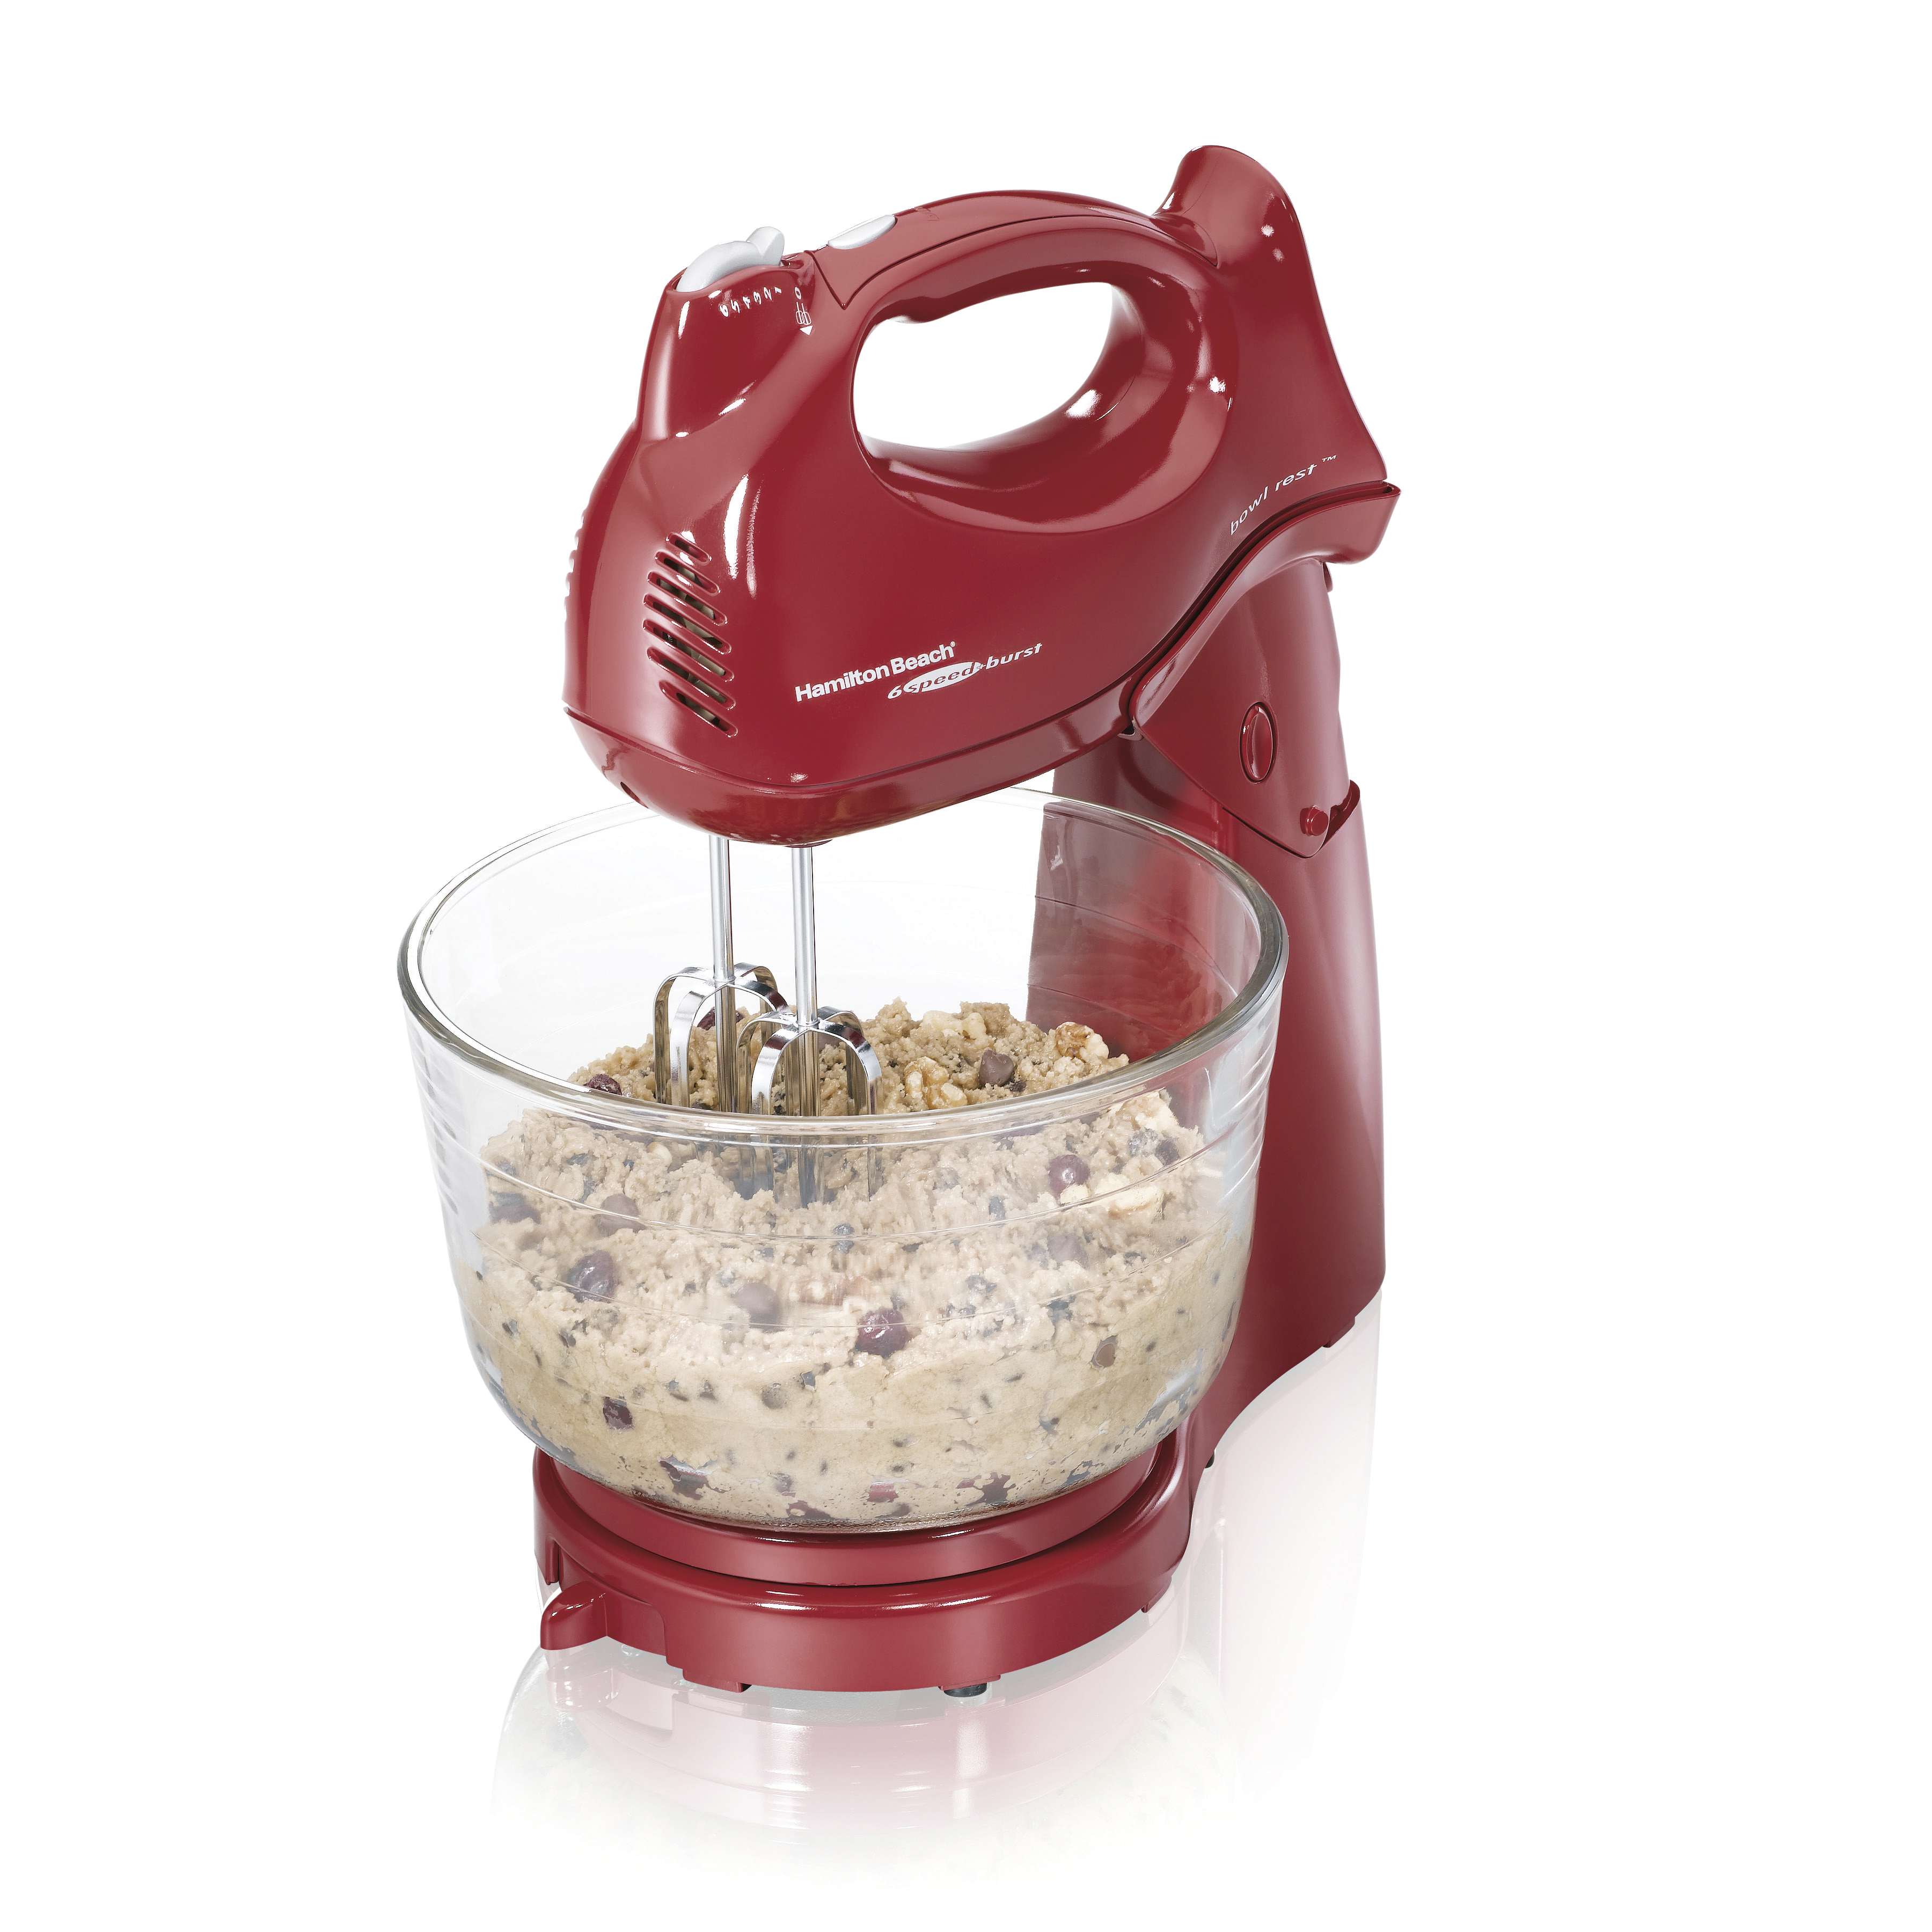 Hamilton Beach Power Deluxe Stand and Hand Mixer, 6 Speeds, 4 Quarts, Red, 64699 - image 1 of 8